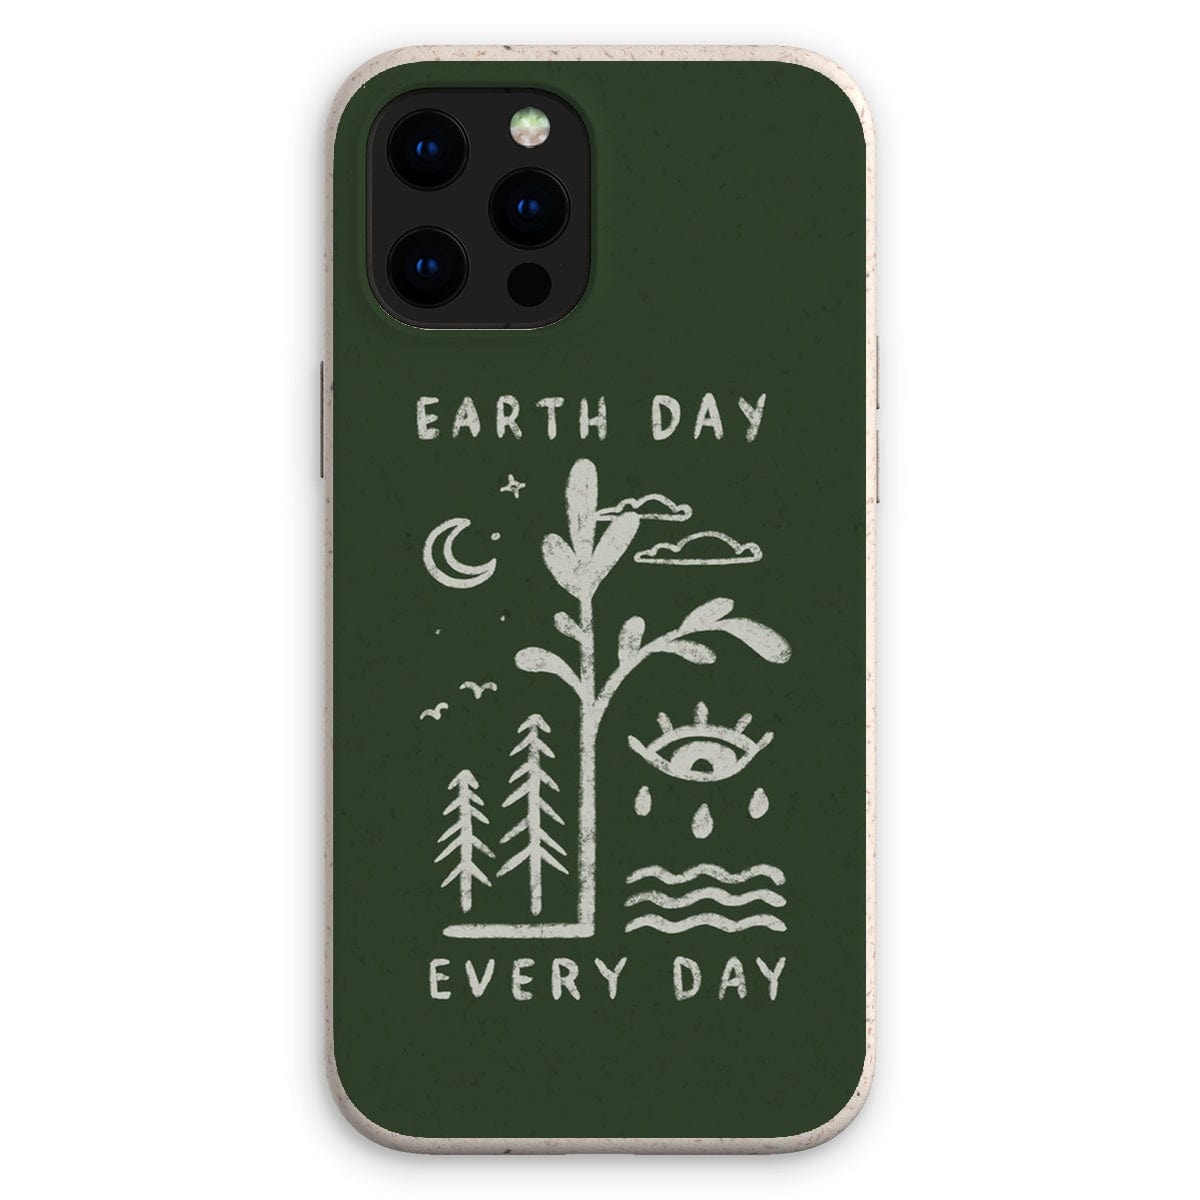 Prodigi Phone & Tablet Cases iPhone 12 Pro Max / Matte Earth Day Eco Phone Case